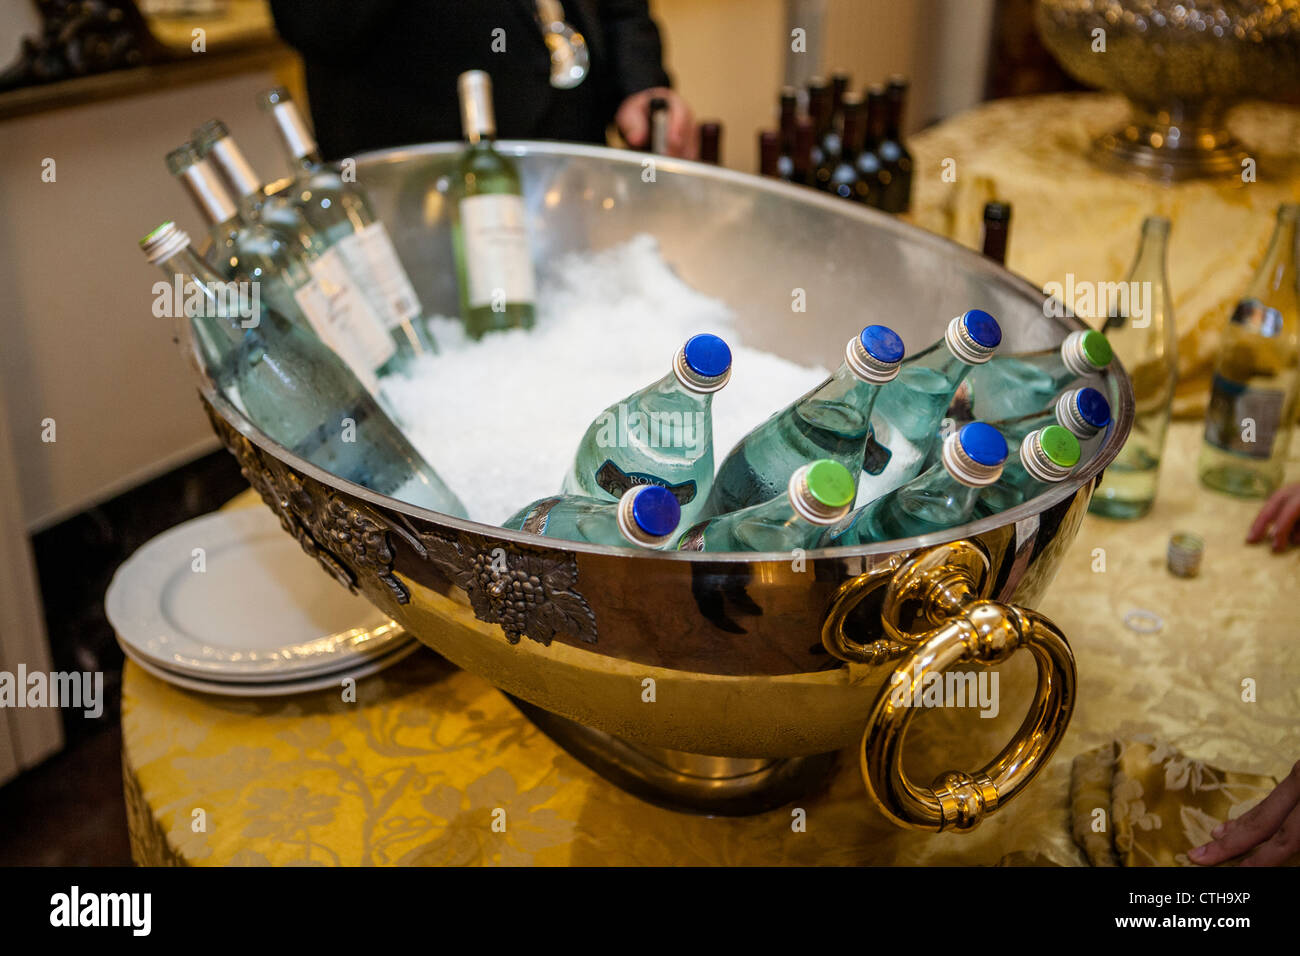 Ornate wine cooler with bottled water and wine Stock Photo